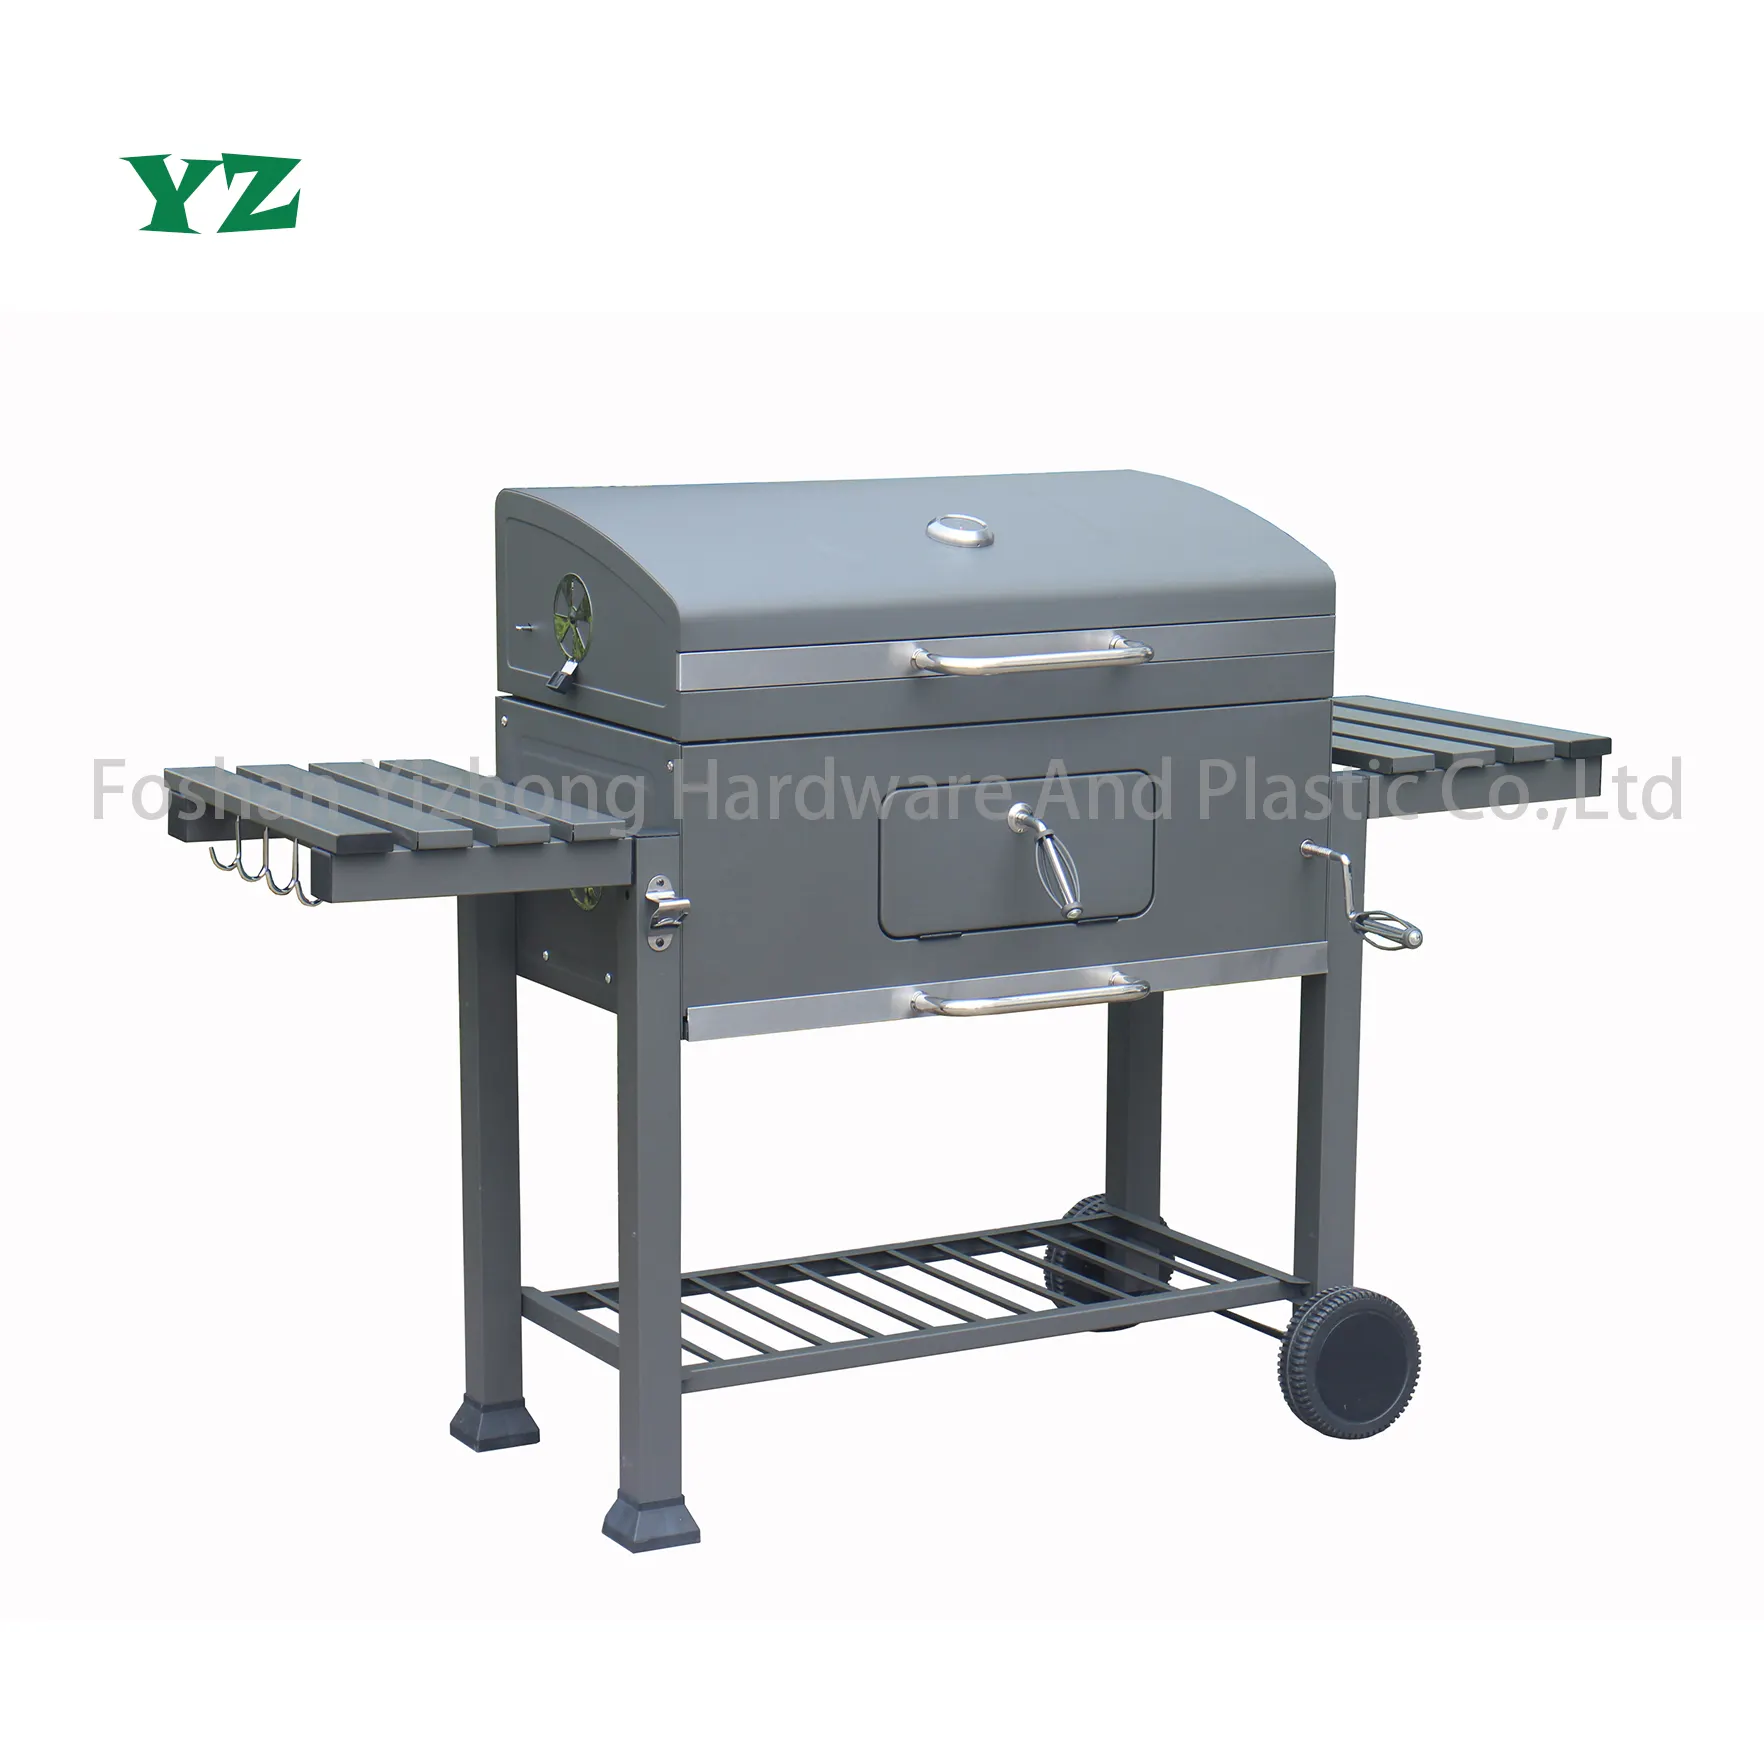 YZ 32 inch Adjustable Height Trolly Smoker Charcoal Outdoor Cooking BBQ Grill